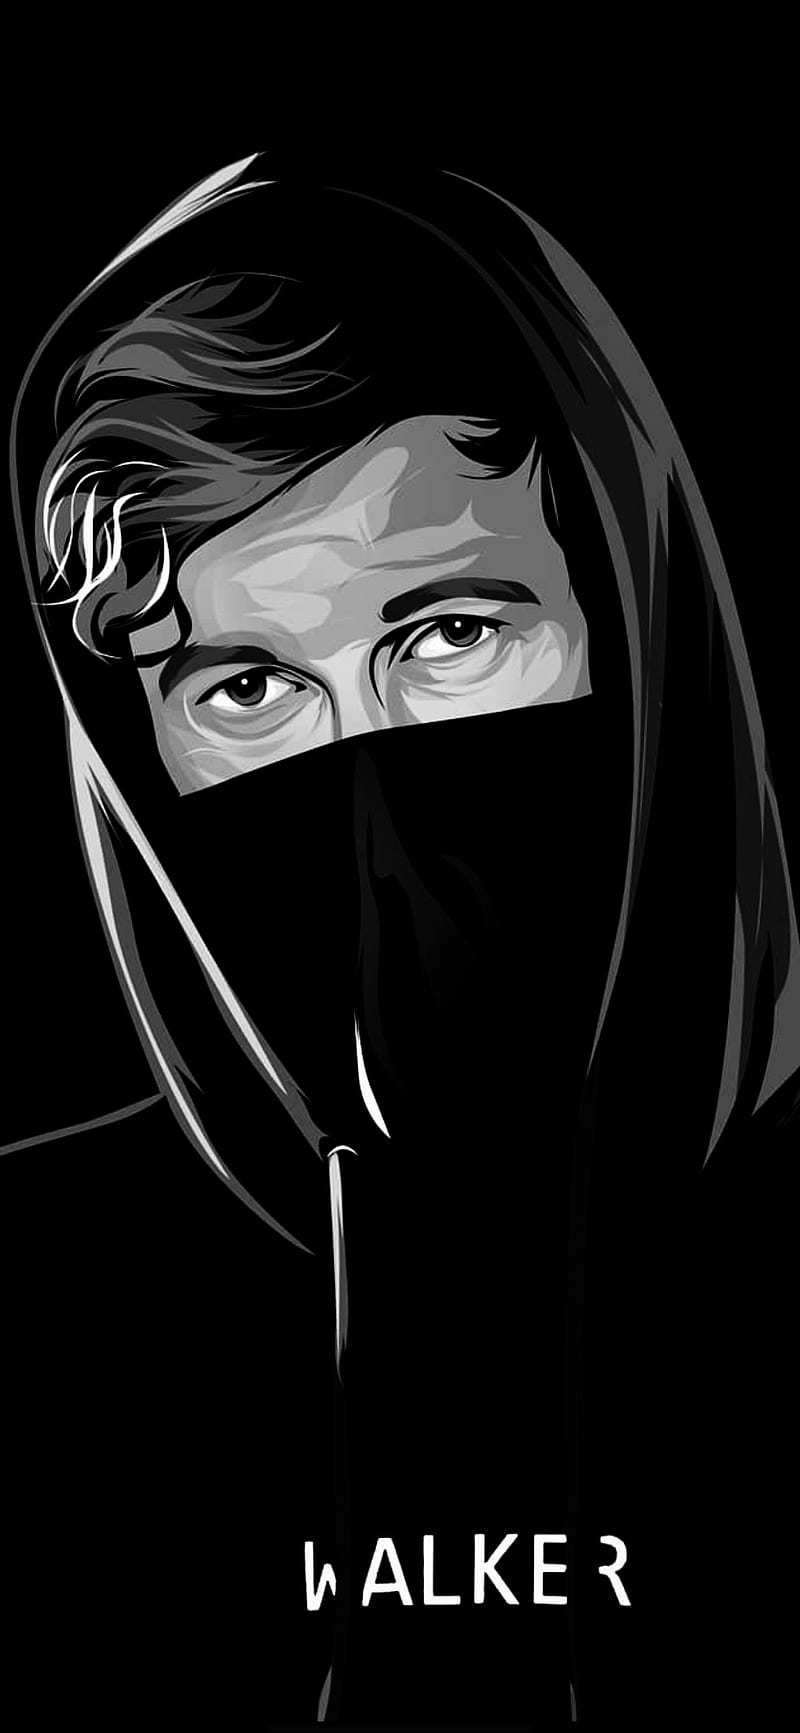 How to draw Alan walker drawing Sketch step by step || Alan walker face  Sketch with Logo. | Drawing sketches, Face sketch, Drawings